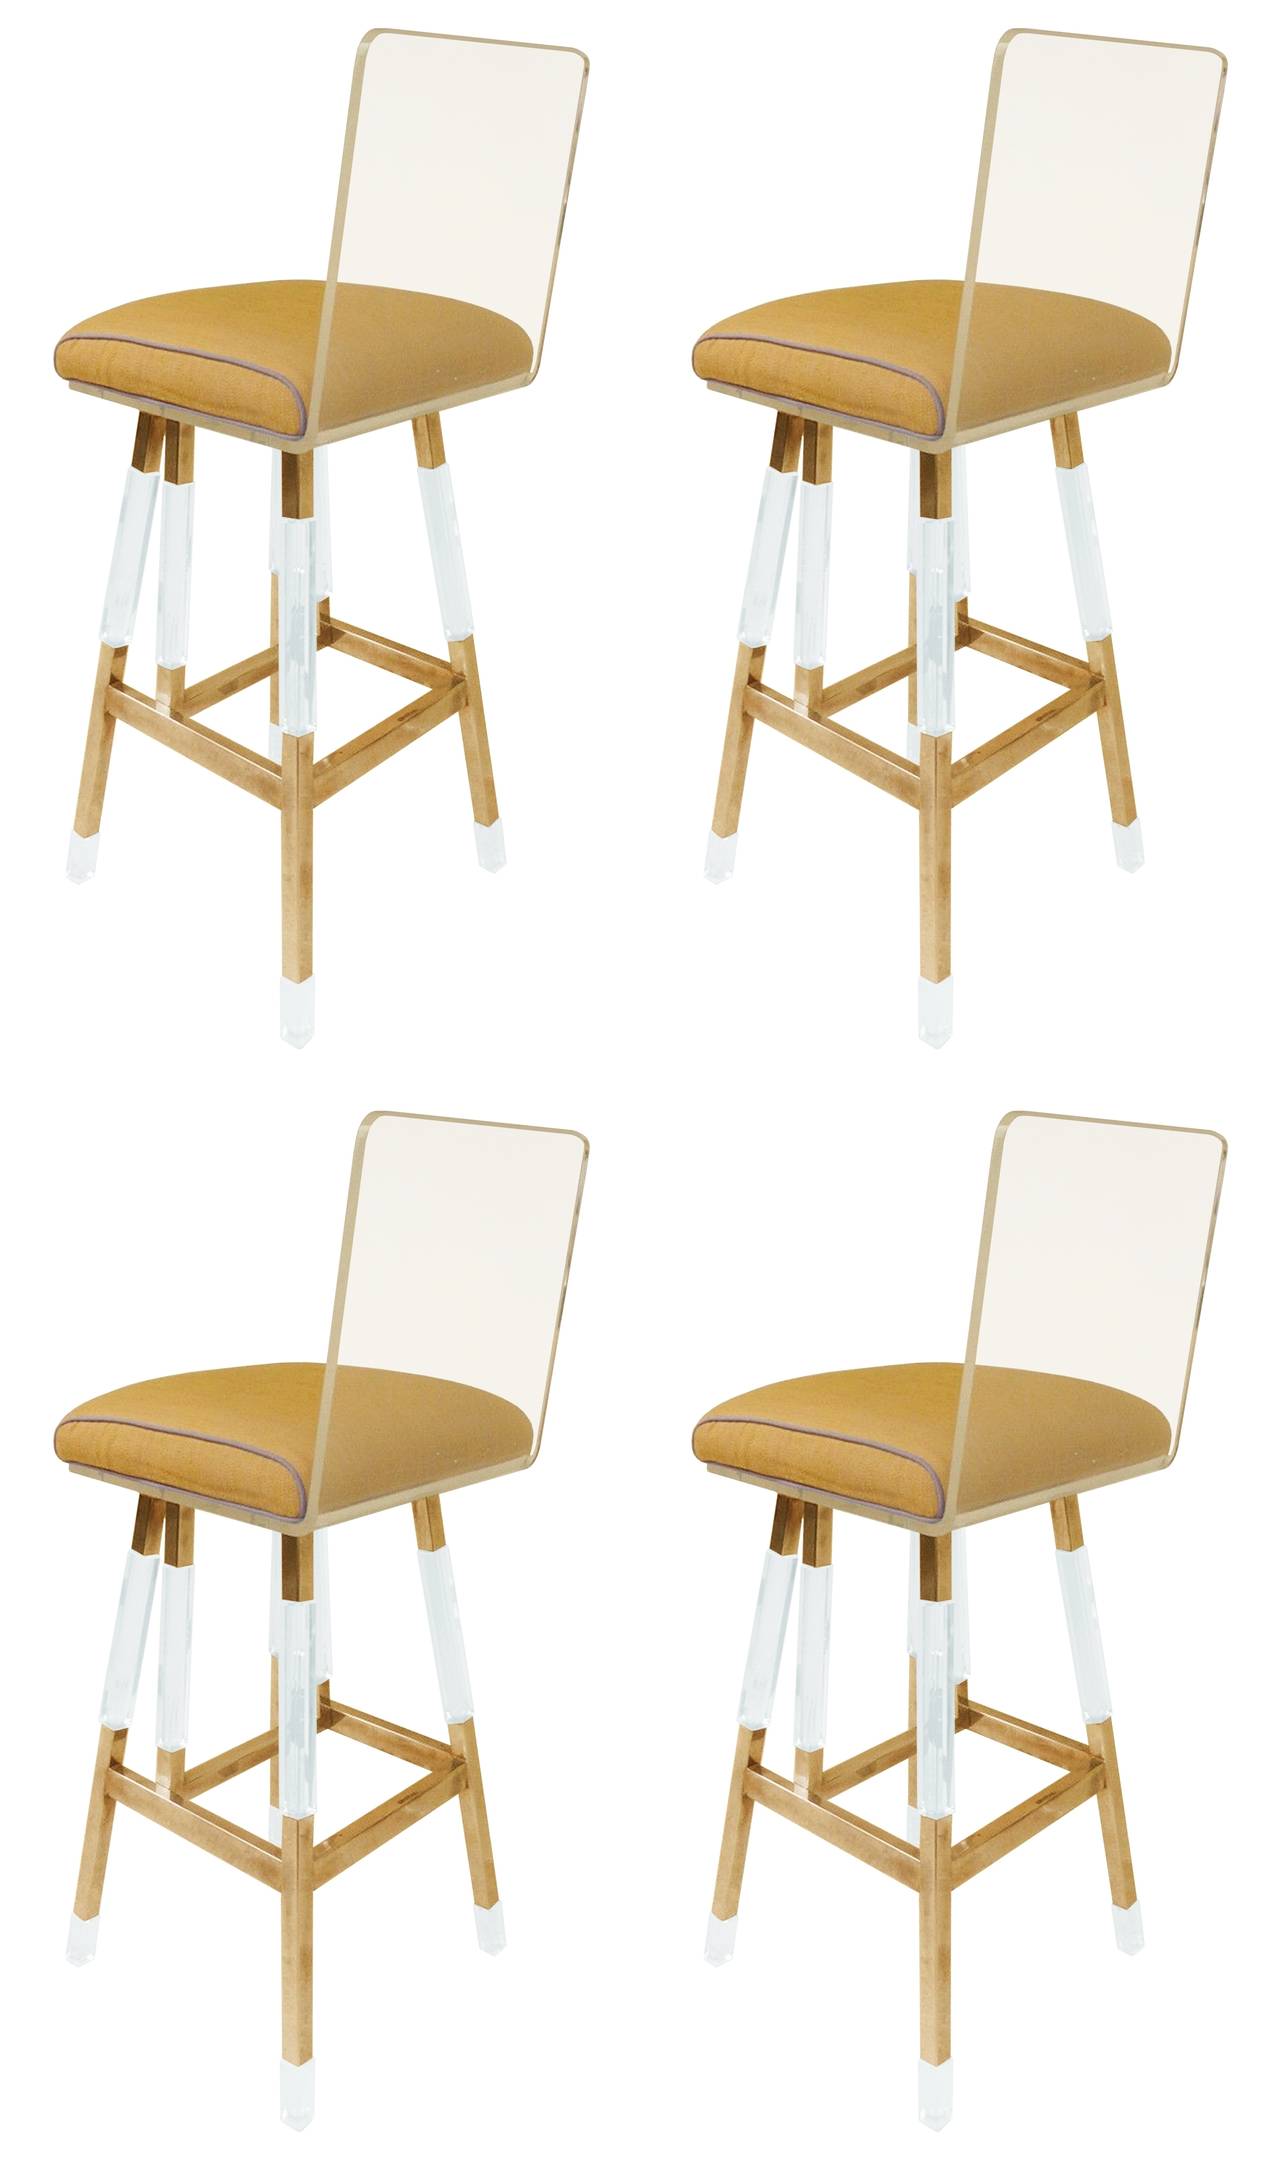 Beautiful set of four bar-stools designed by Charles Hollis Jones in the 1970s, This design is a blend of his Metric collection and the waterfall line and the design was executed beautifully.
The frame is made out of solid brass and Lucite and the